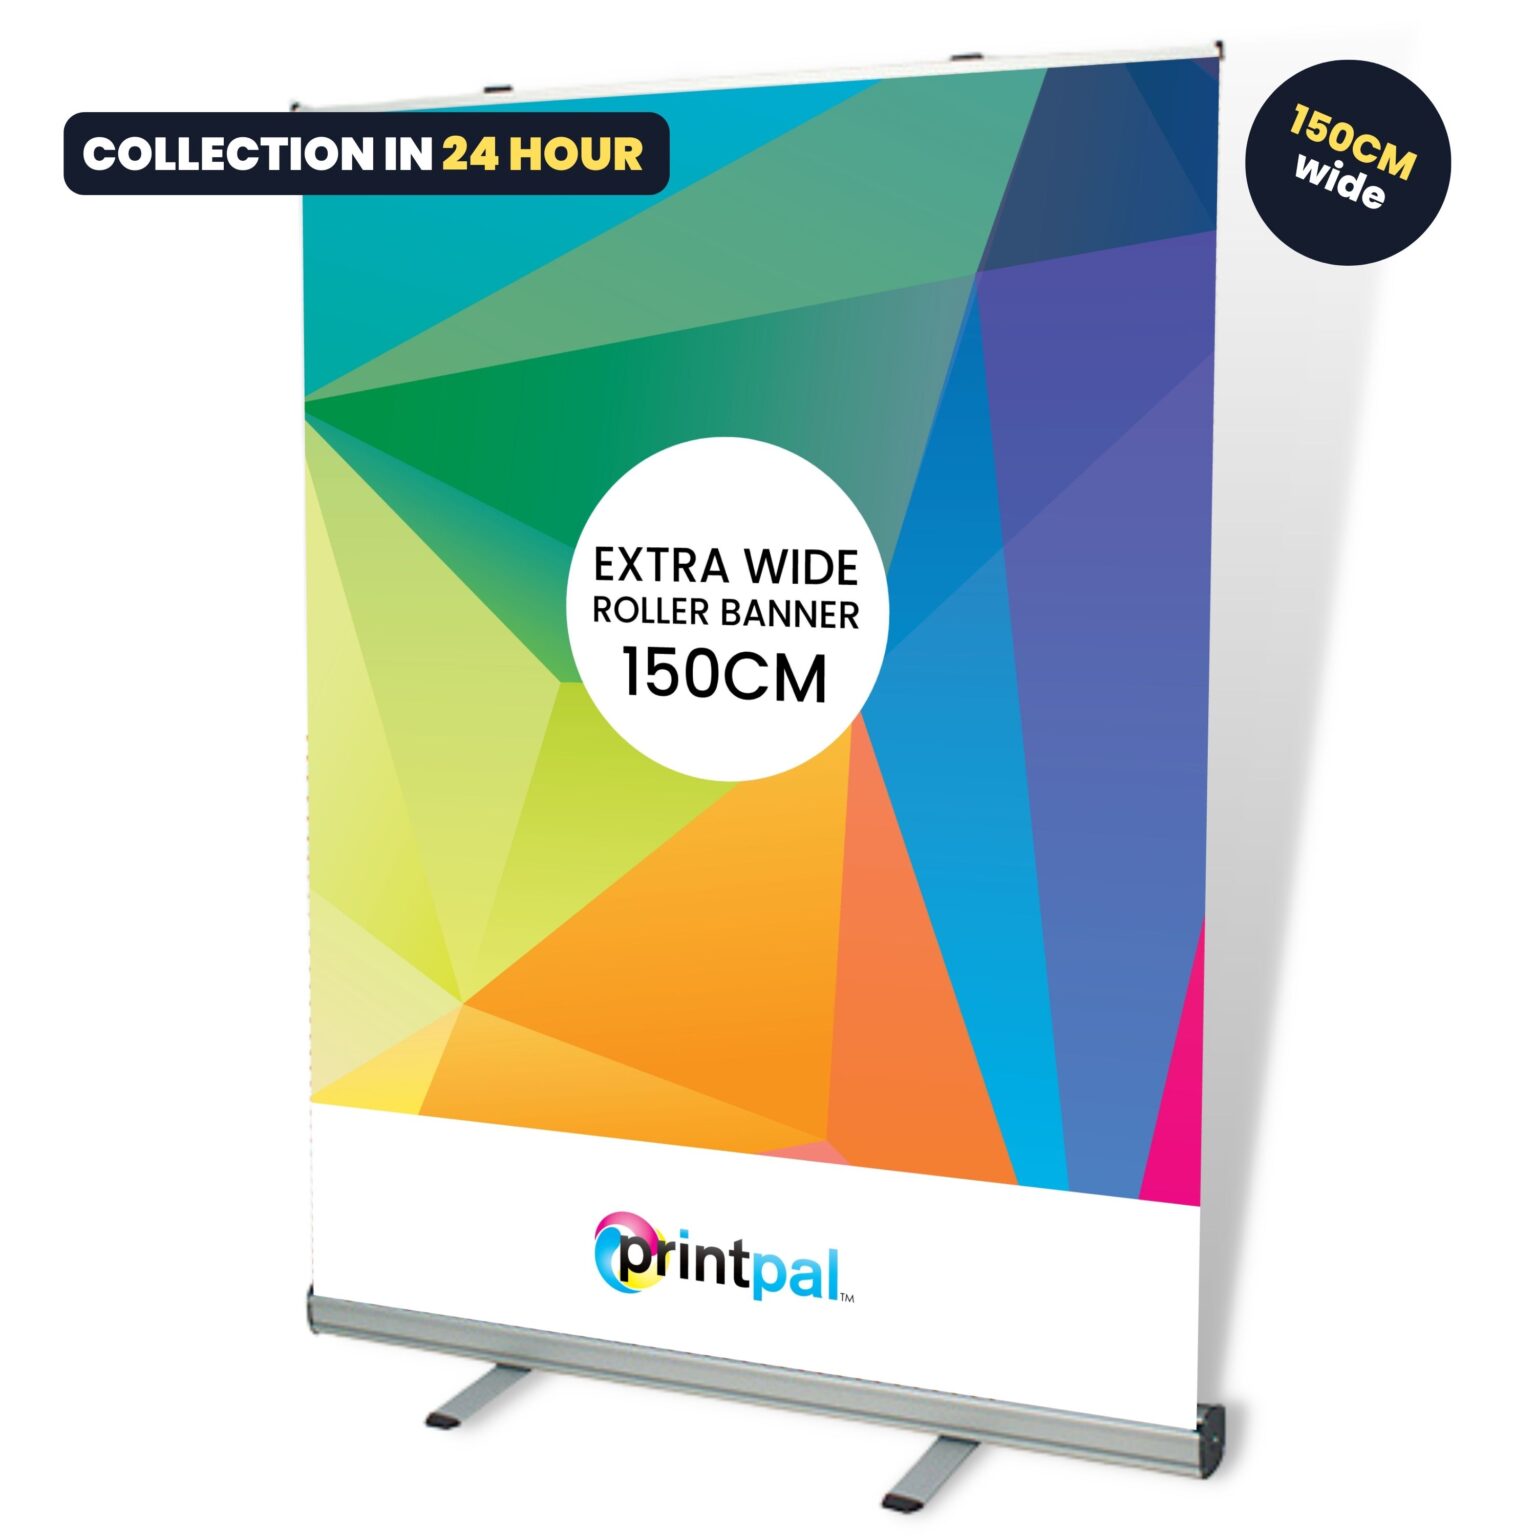 Extra Wide Roller Banner Printing London